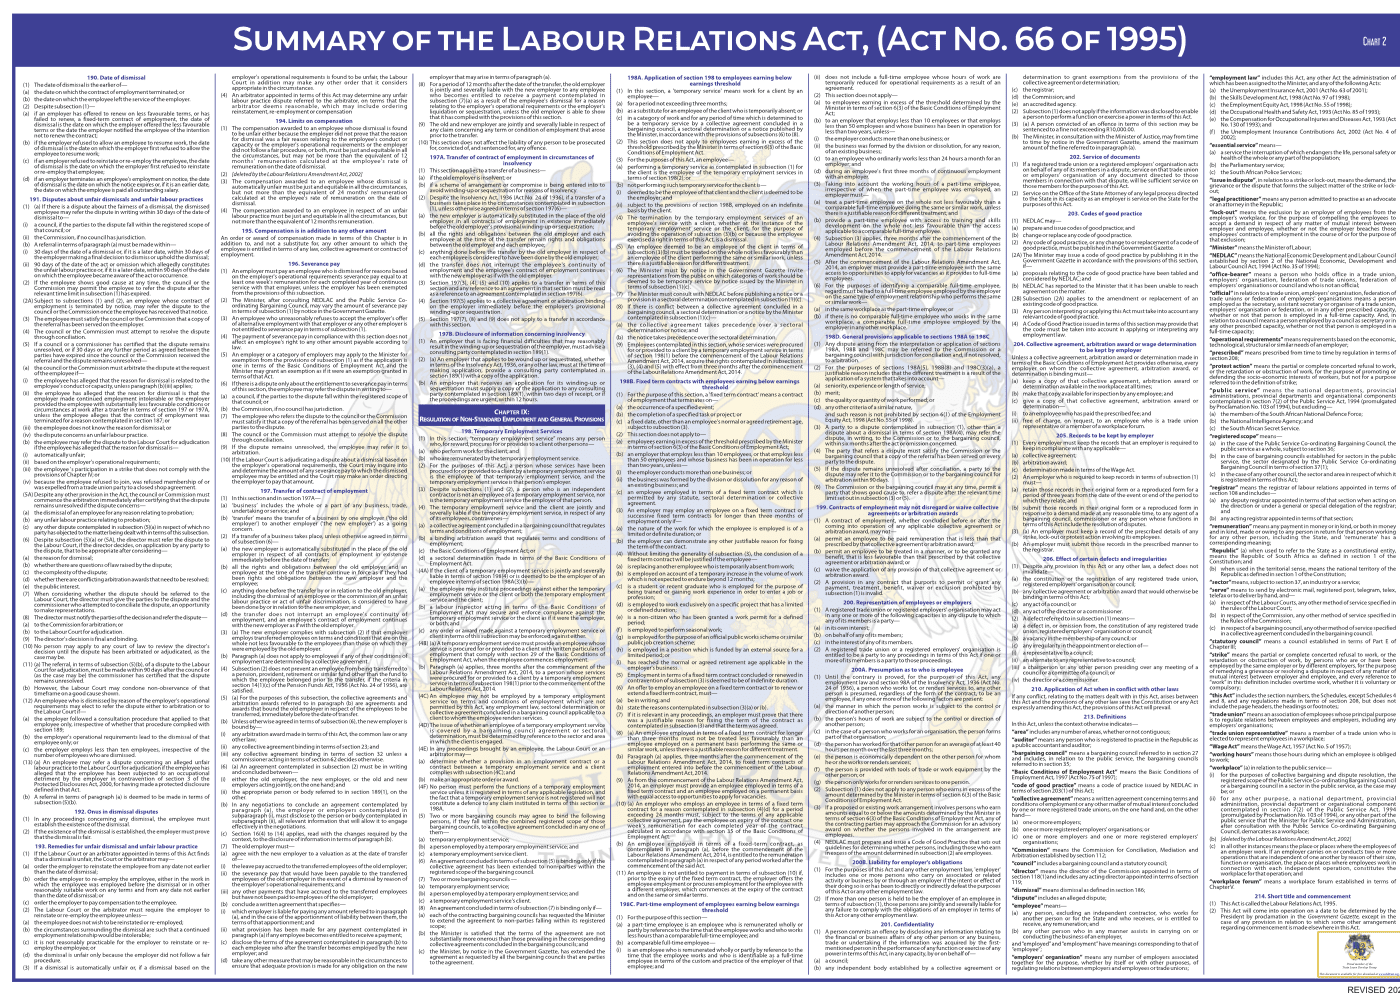 Labour Relations Act Summary (Act No.66 of 1995)_A1